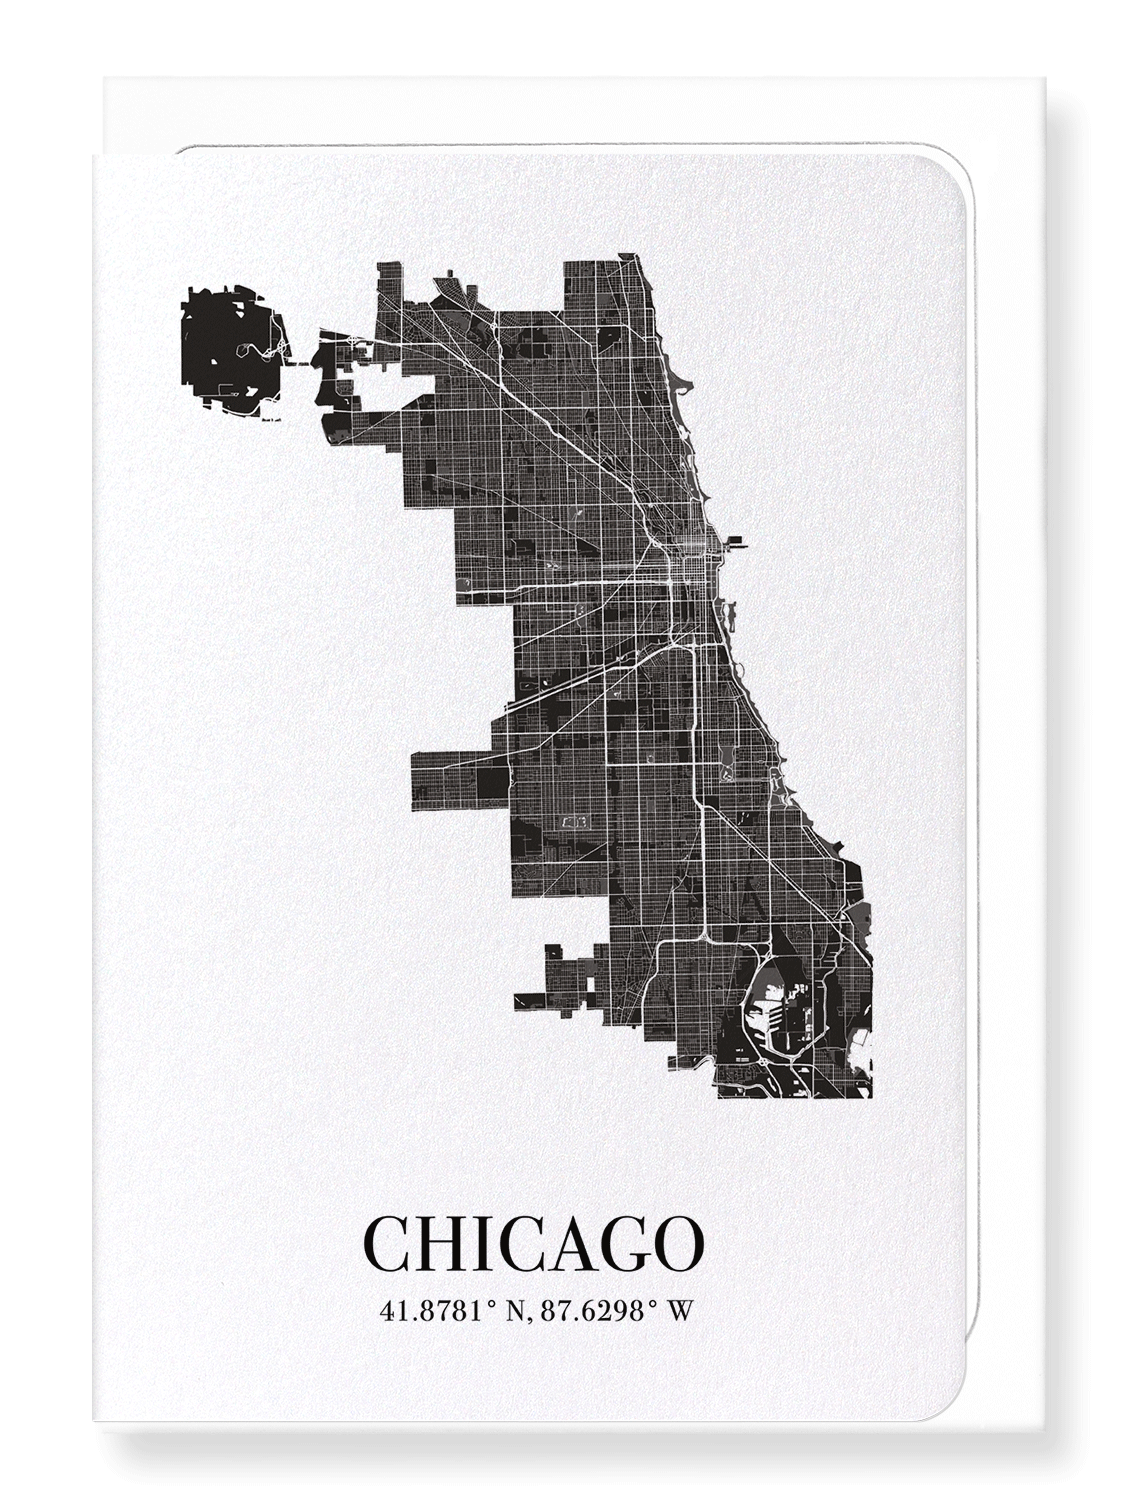 CHICAGO CUTOUT: 8xCards